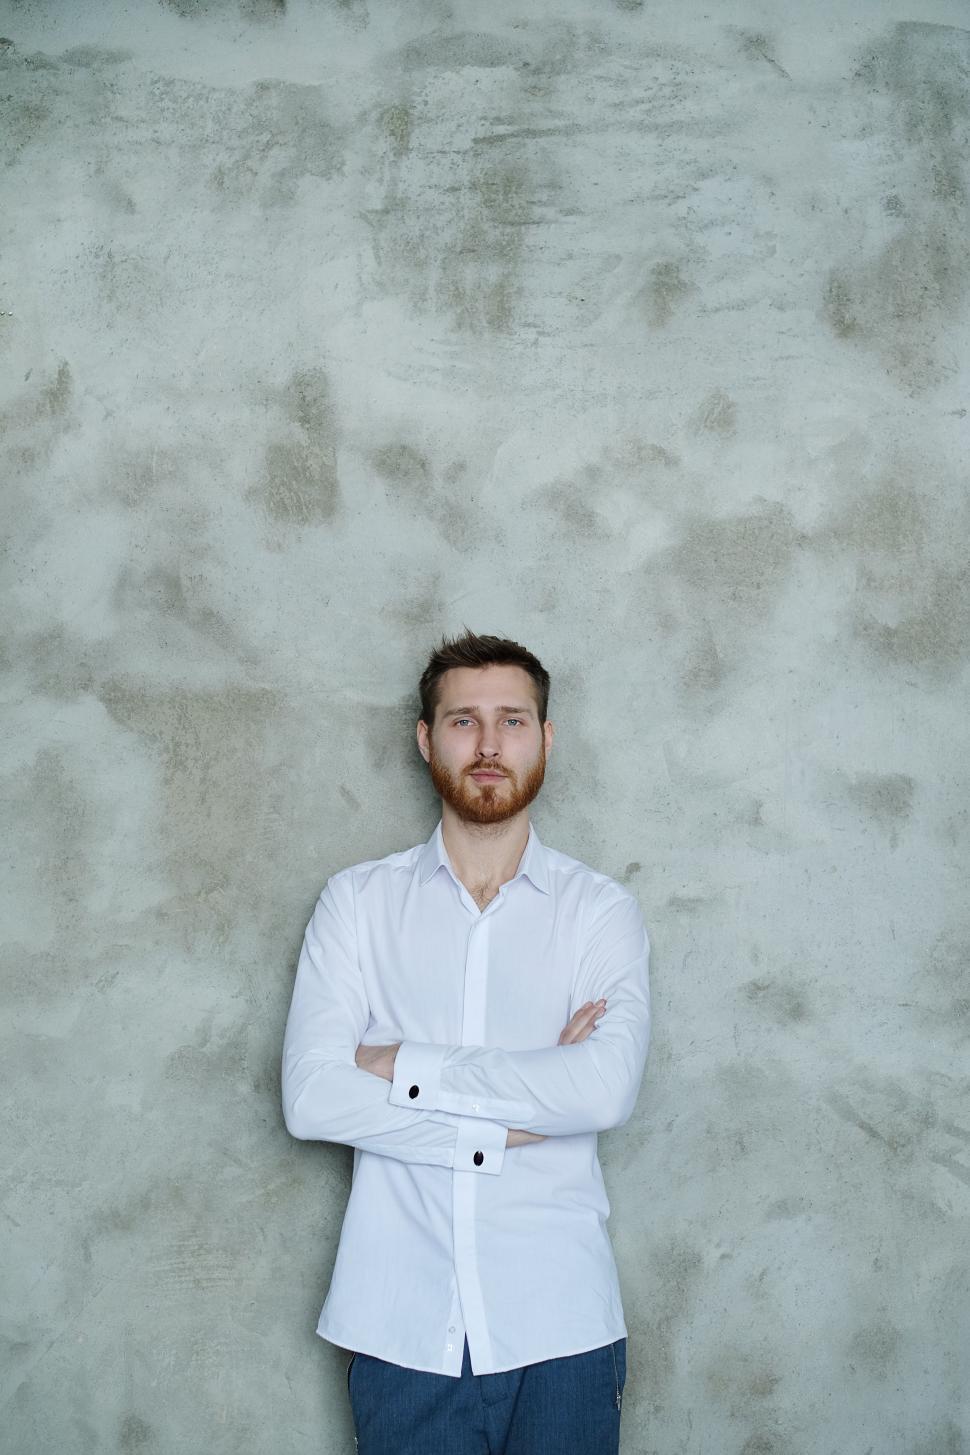 Free Image of Man in white shirt against textured wall 